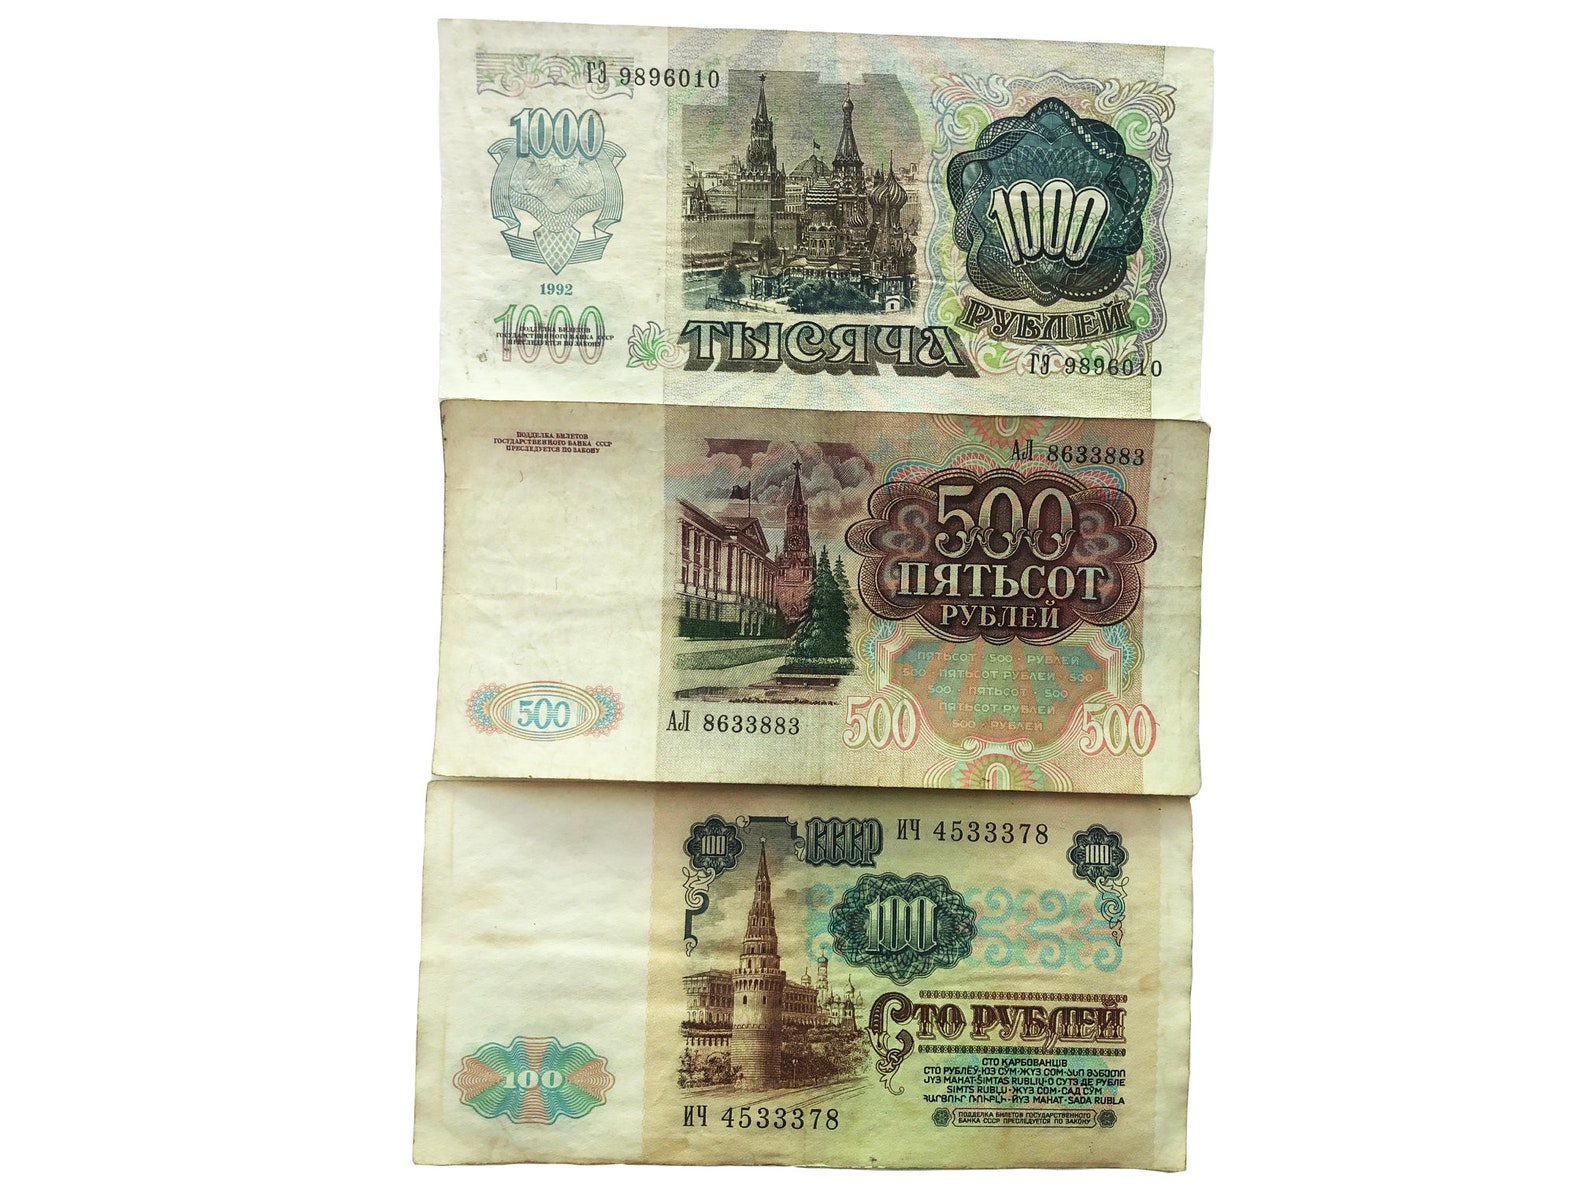 372800 USD to rubles.